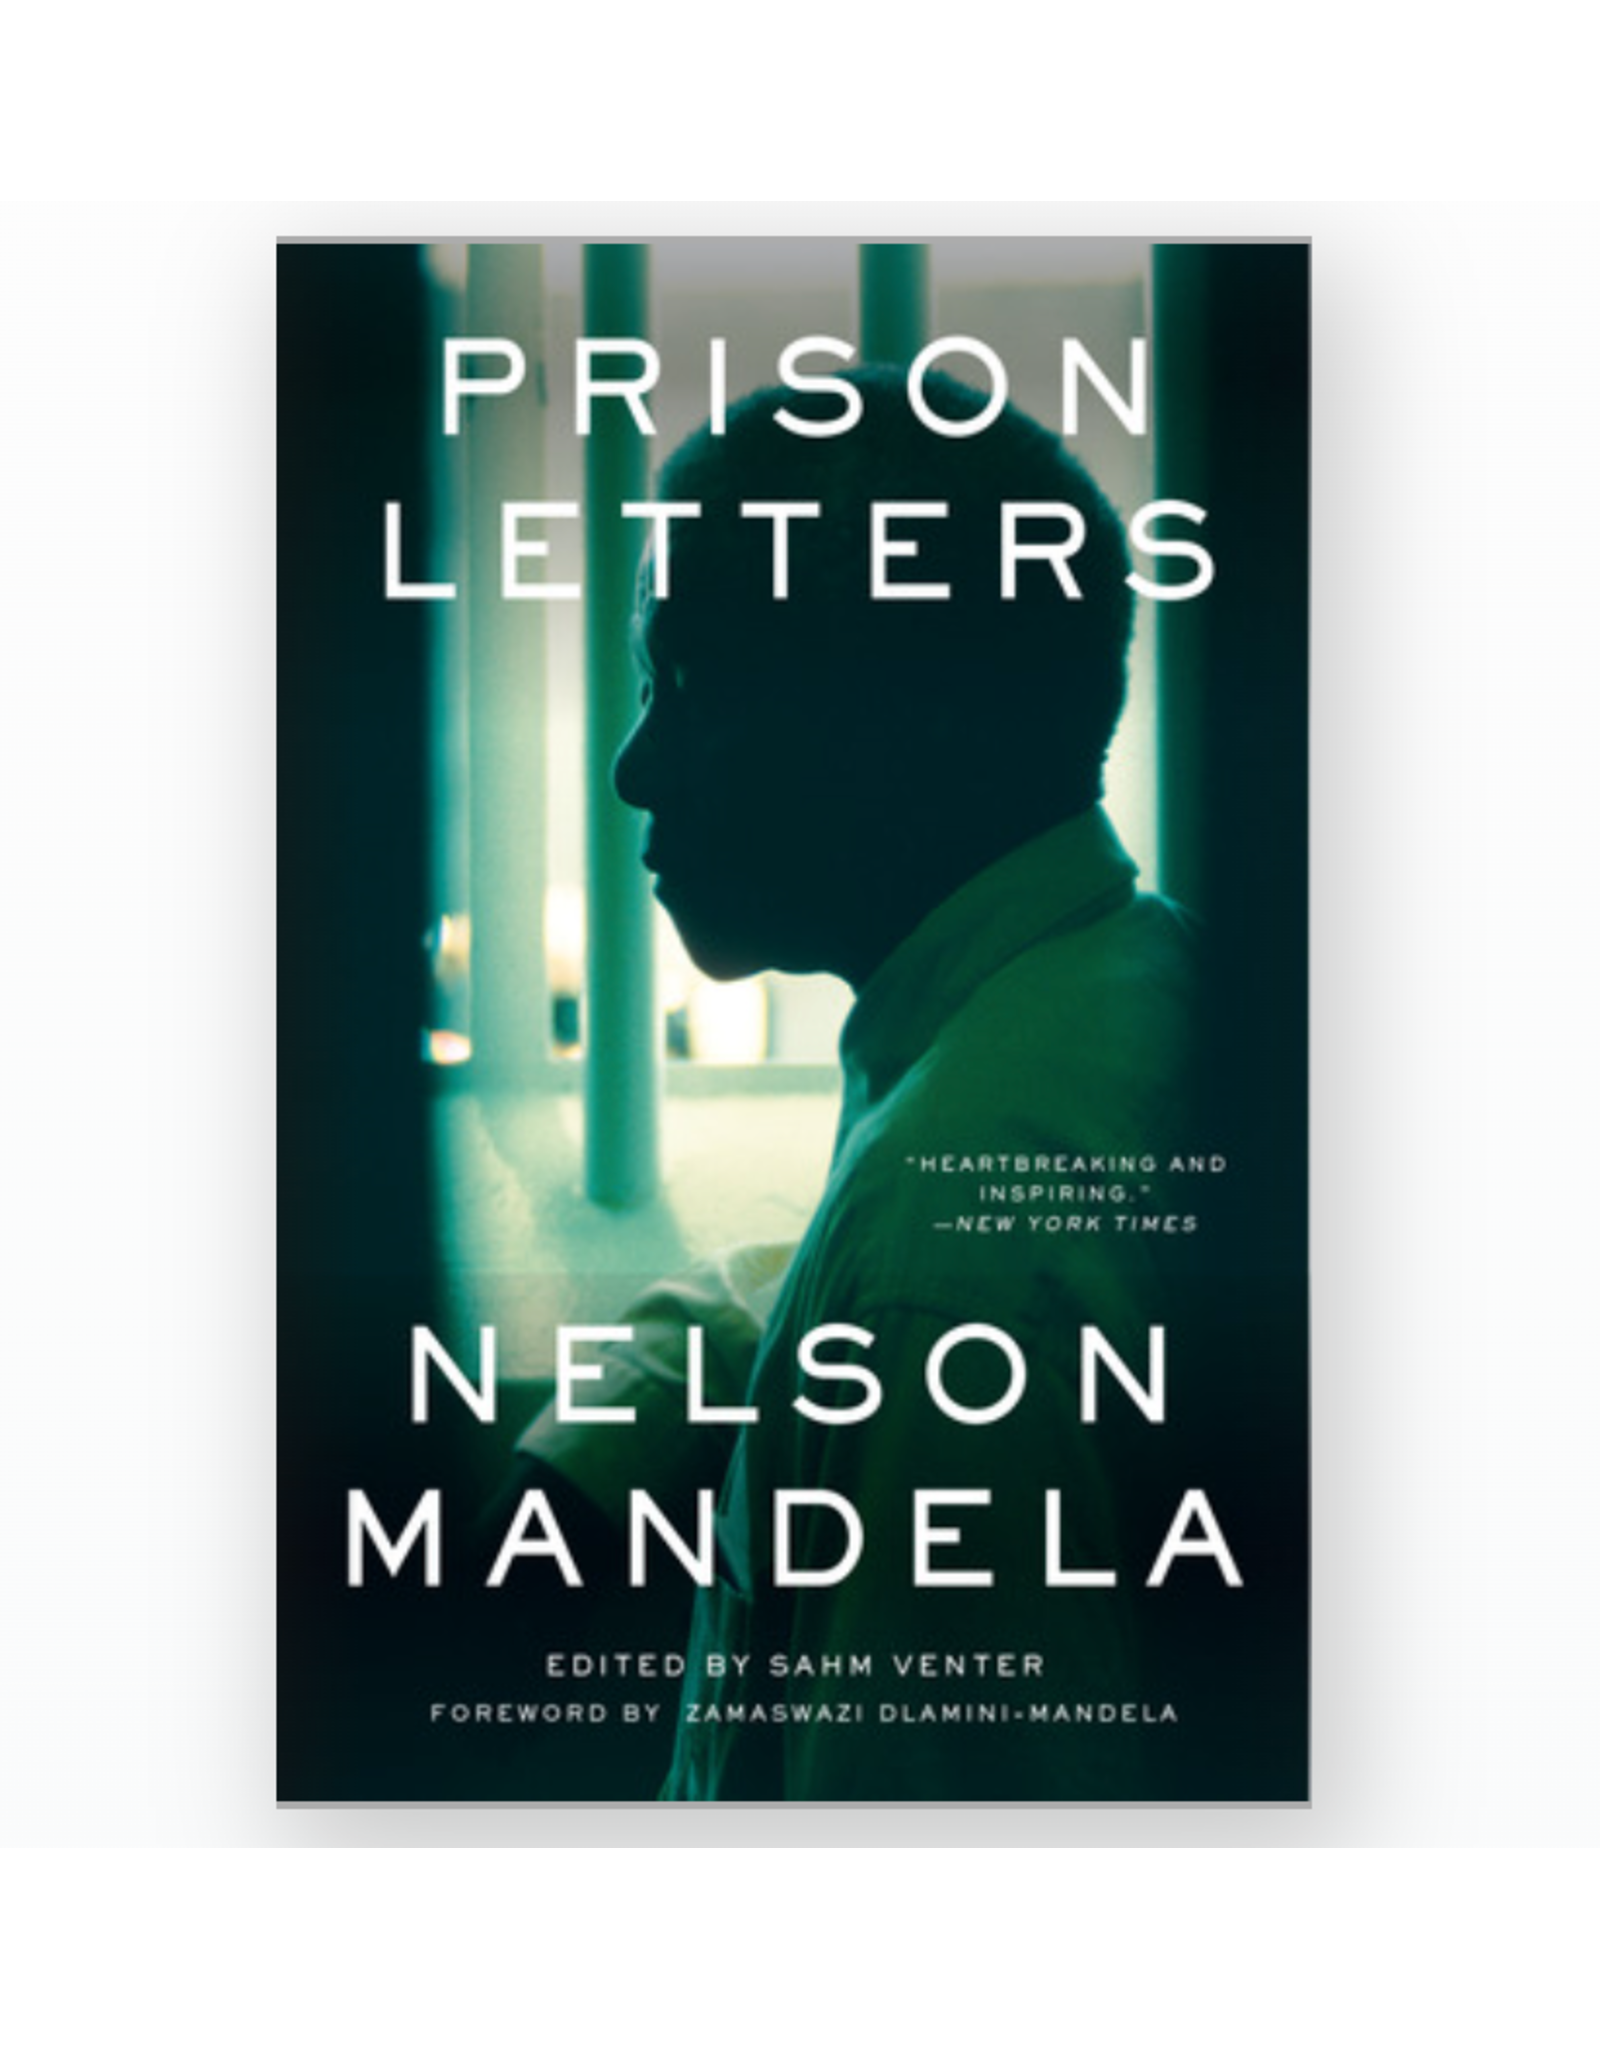 African History & Culture Prison Letters of Nelson Mandela